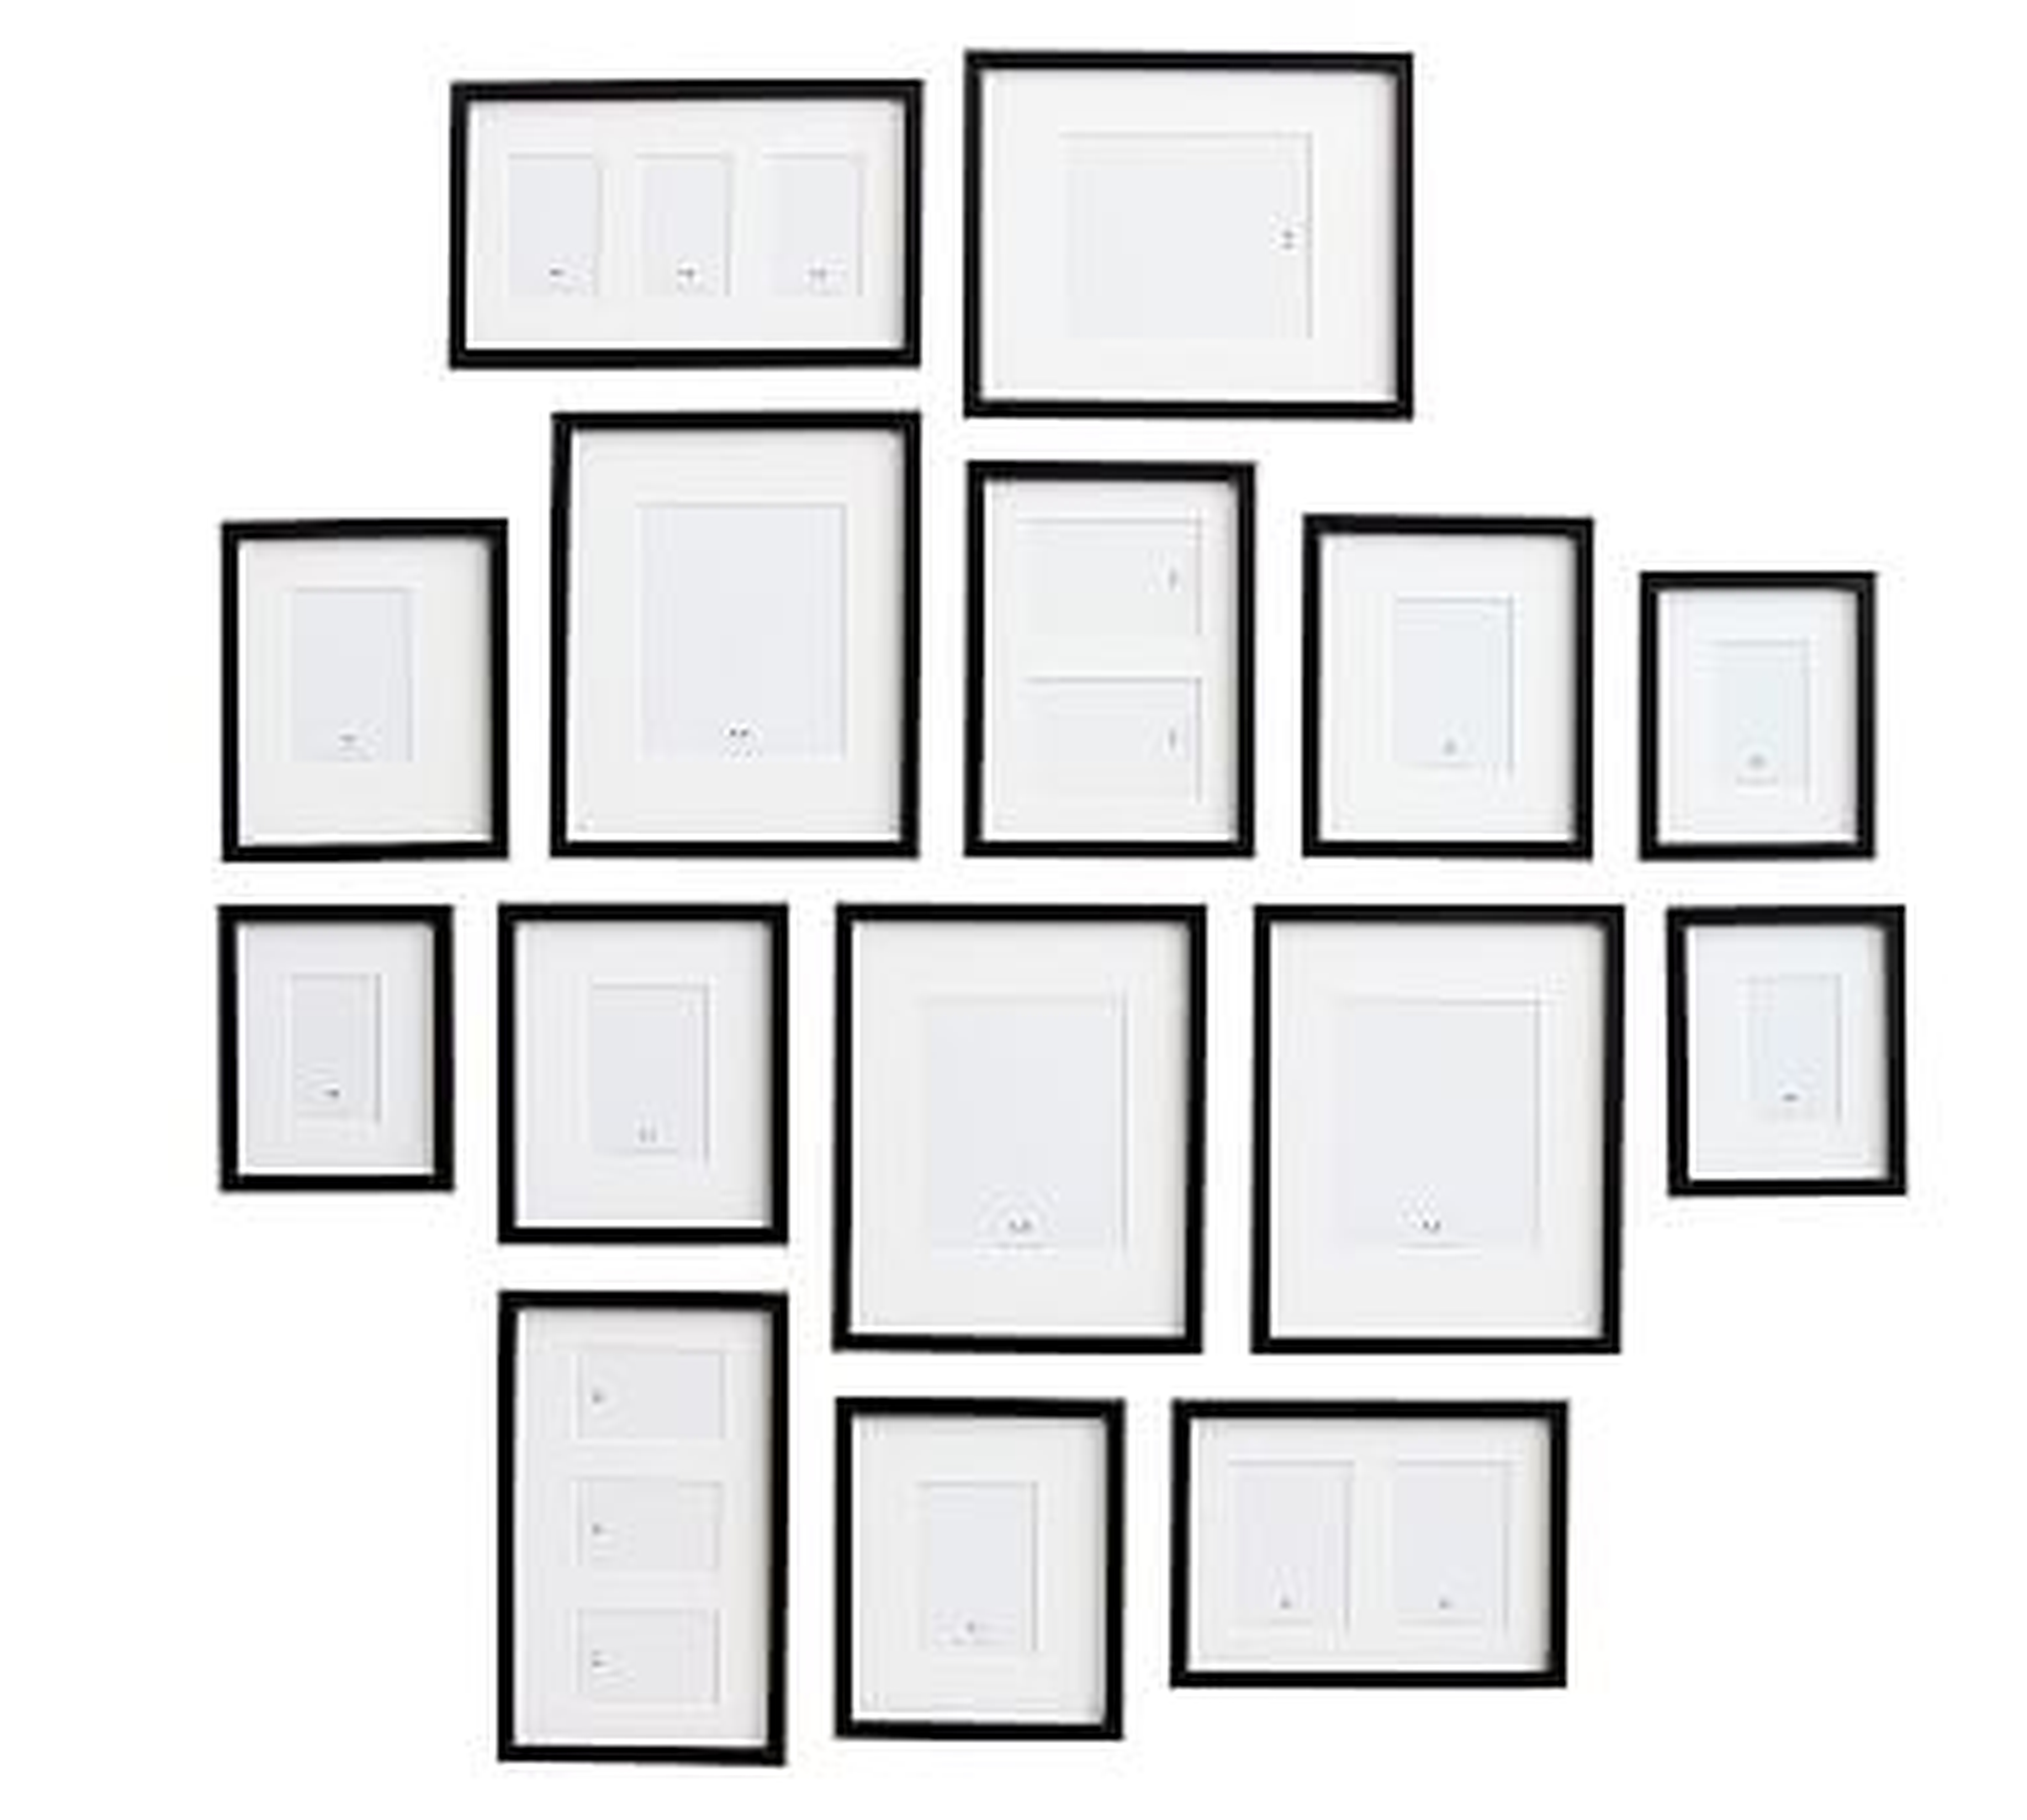 Gallery in a Box, Black Frames, Set of 15 - Pottery Barn